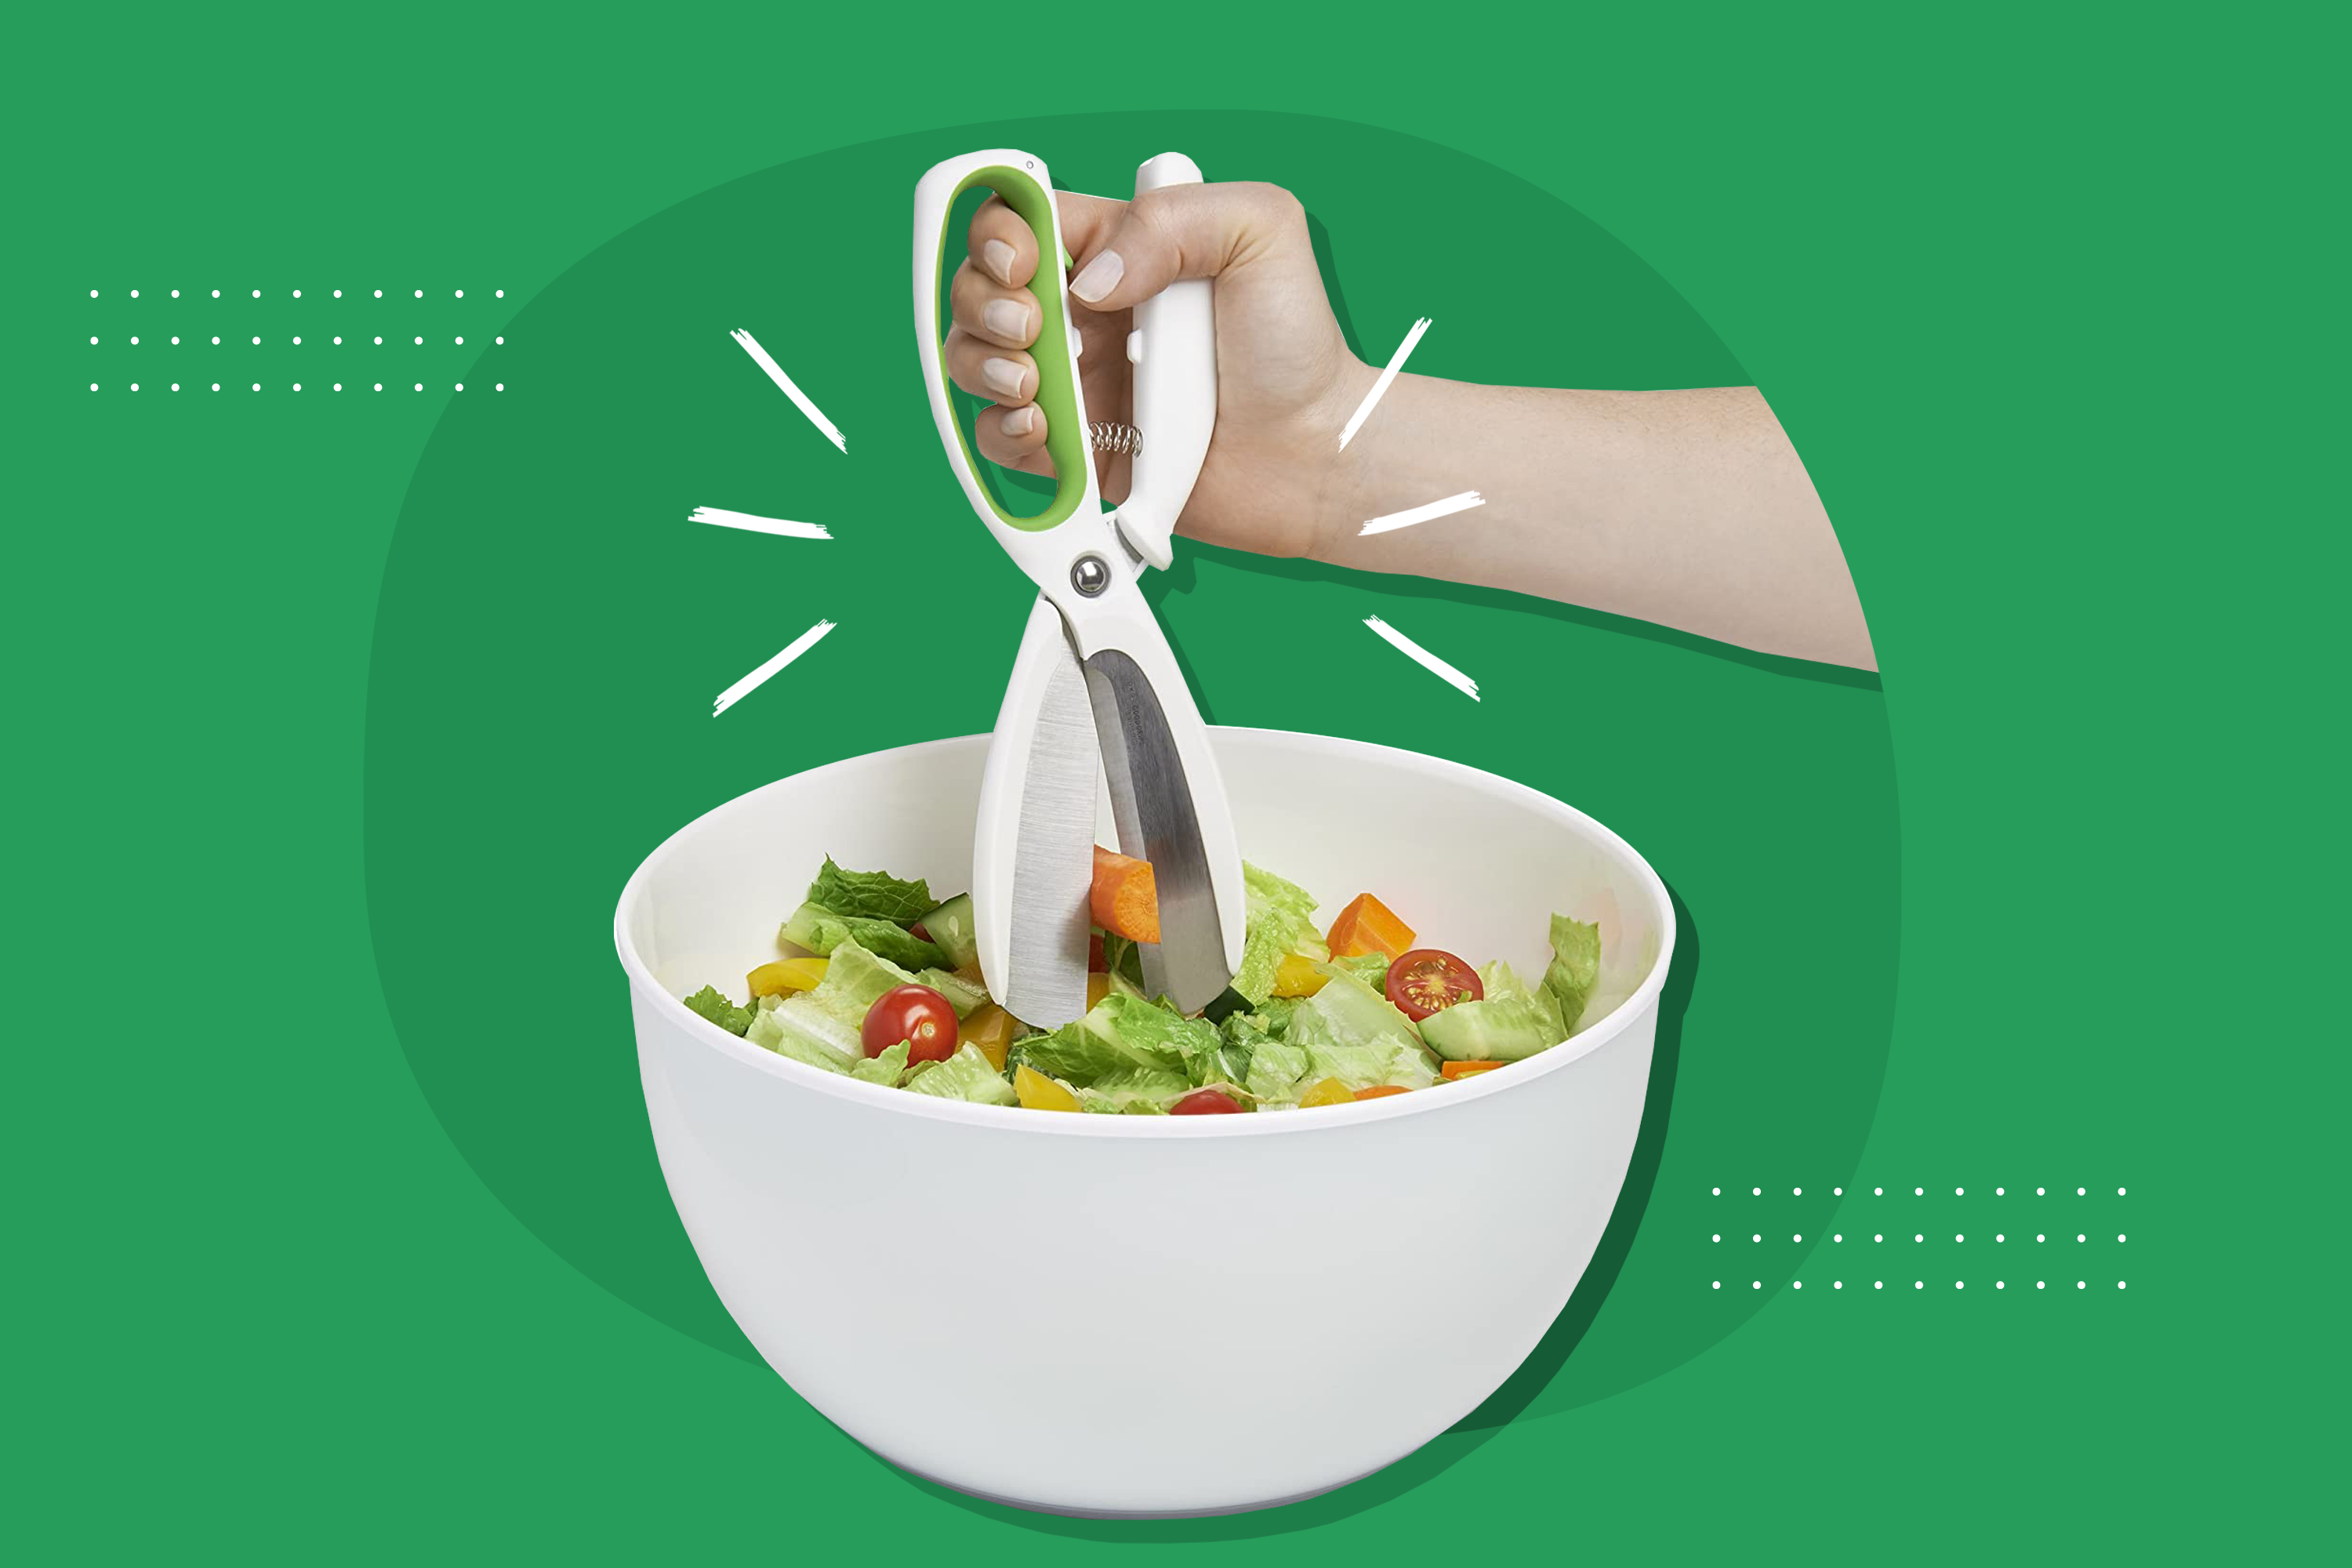 Why Salad Scissors Help With Meal Prep and the Best Pair to Buy